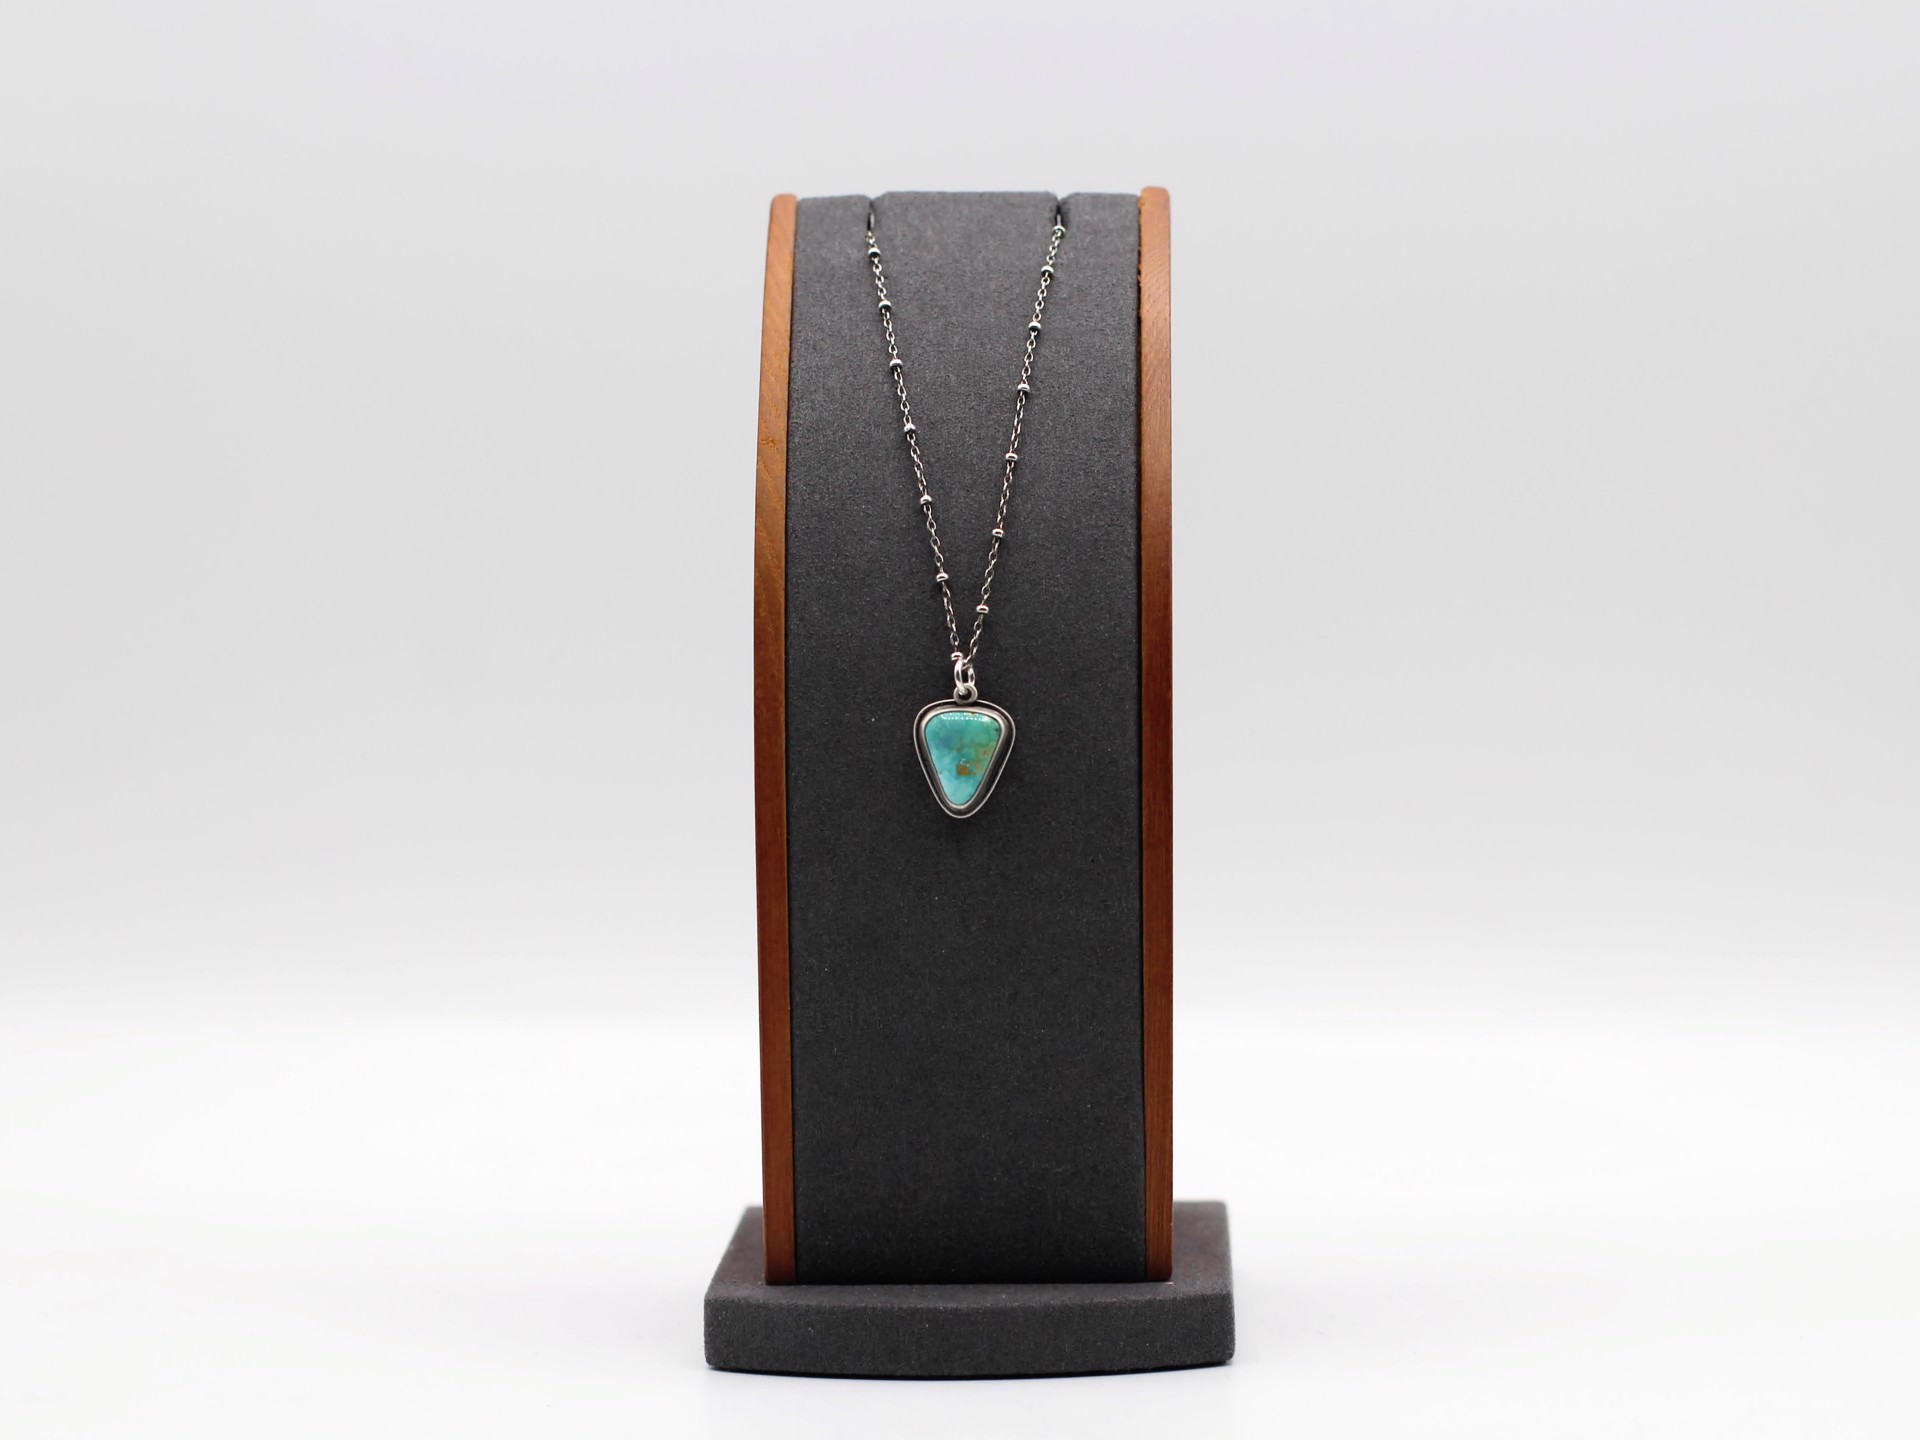 Emerald Valley Turquoise Necklace by Kim Knuth